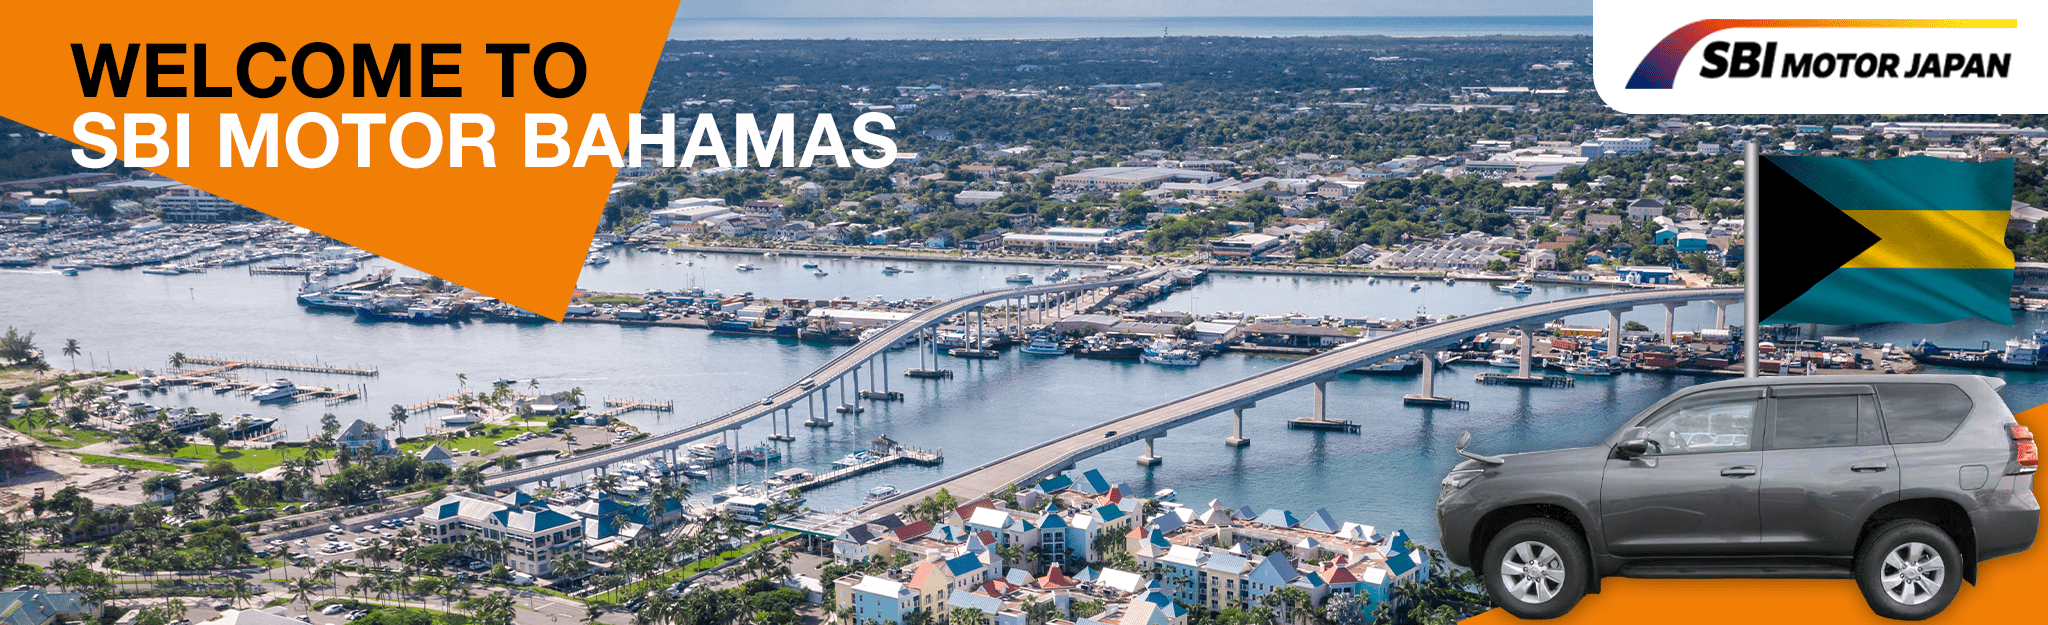 You can get local support in the Bahamas! We offer sophisticated Japanese used cars.